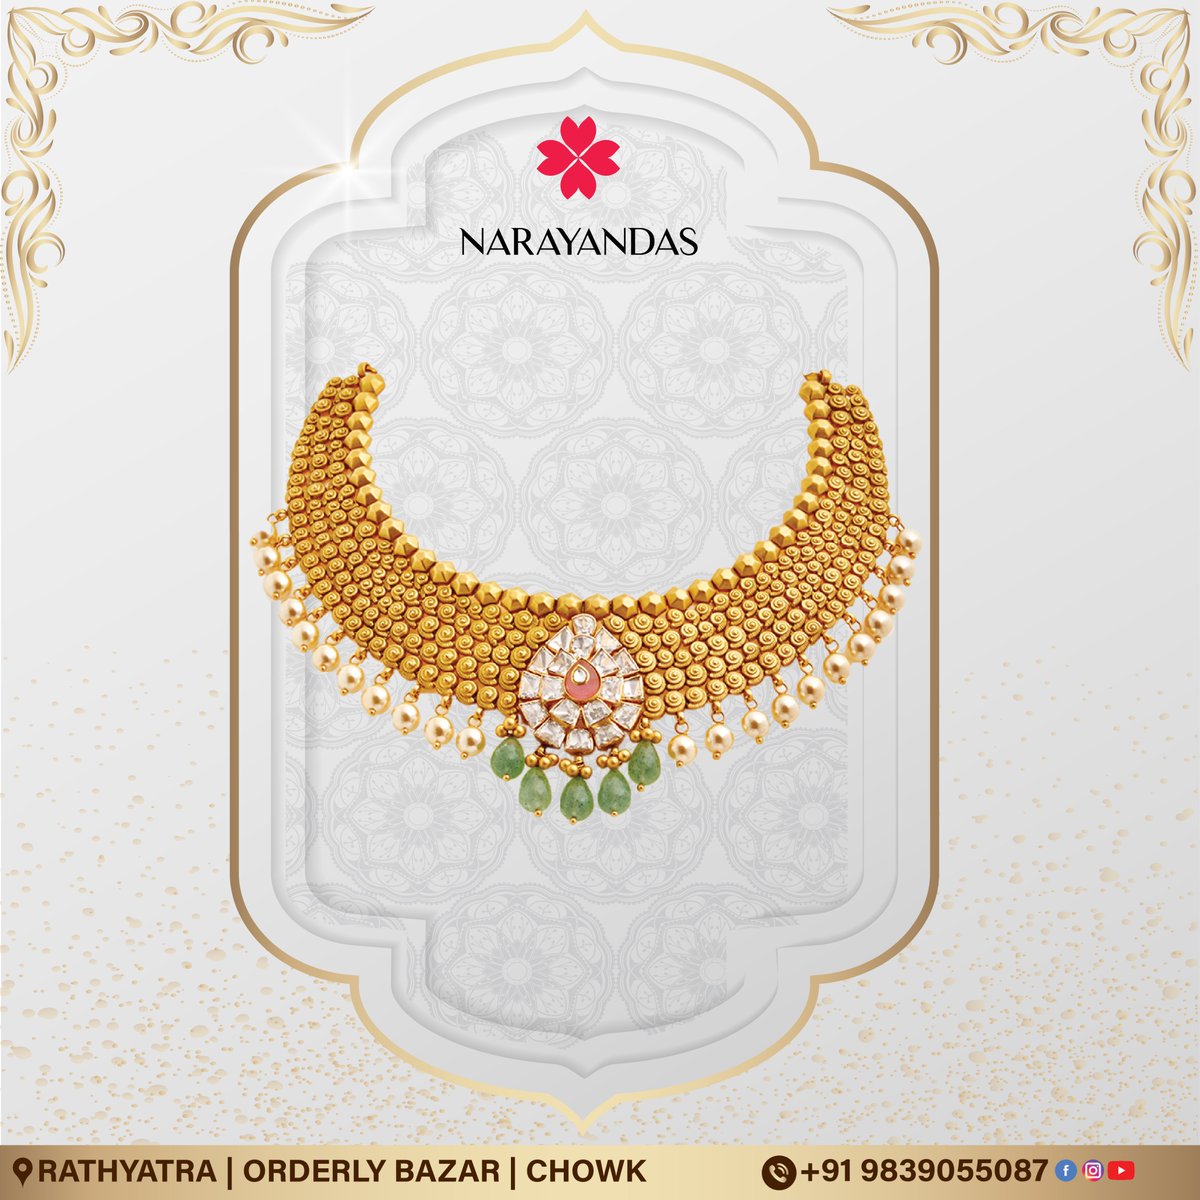 Add a bit of sparkle to your look with our Choker Set. It's perfect for showing off your unique style and making you stand out.
#ChokerSet
#ChokerLove
#CharmInChokers
#ChokerStyle
#AdornYourNeck
#EleganceInChokers
#narayandasjewellers